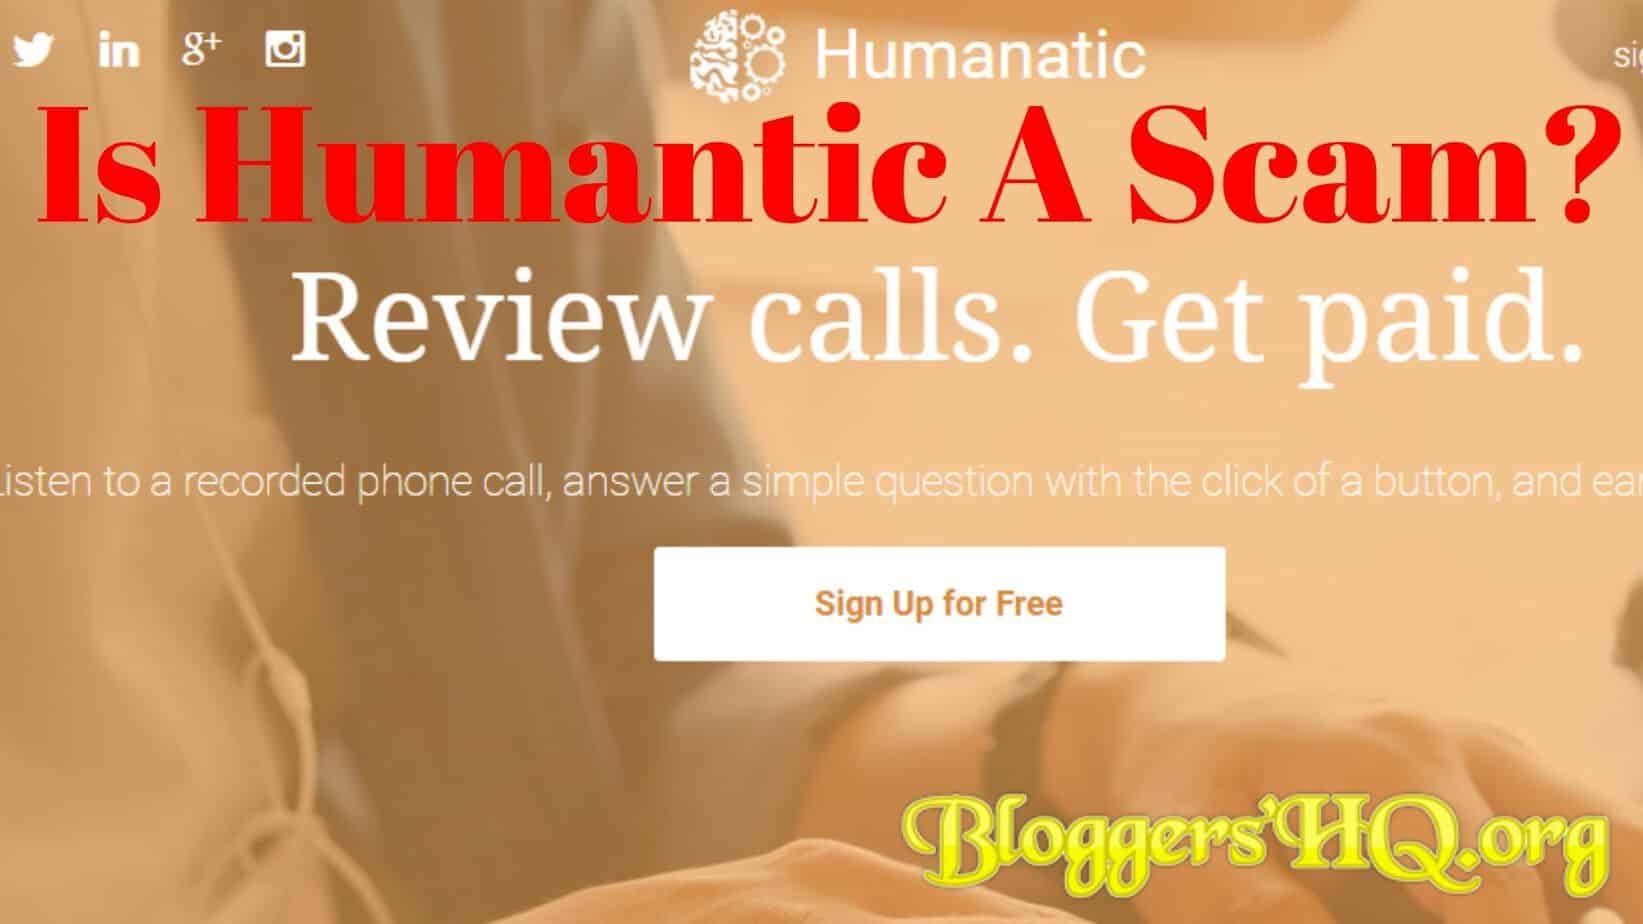 Is Humanatic A Scam